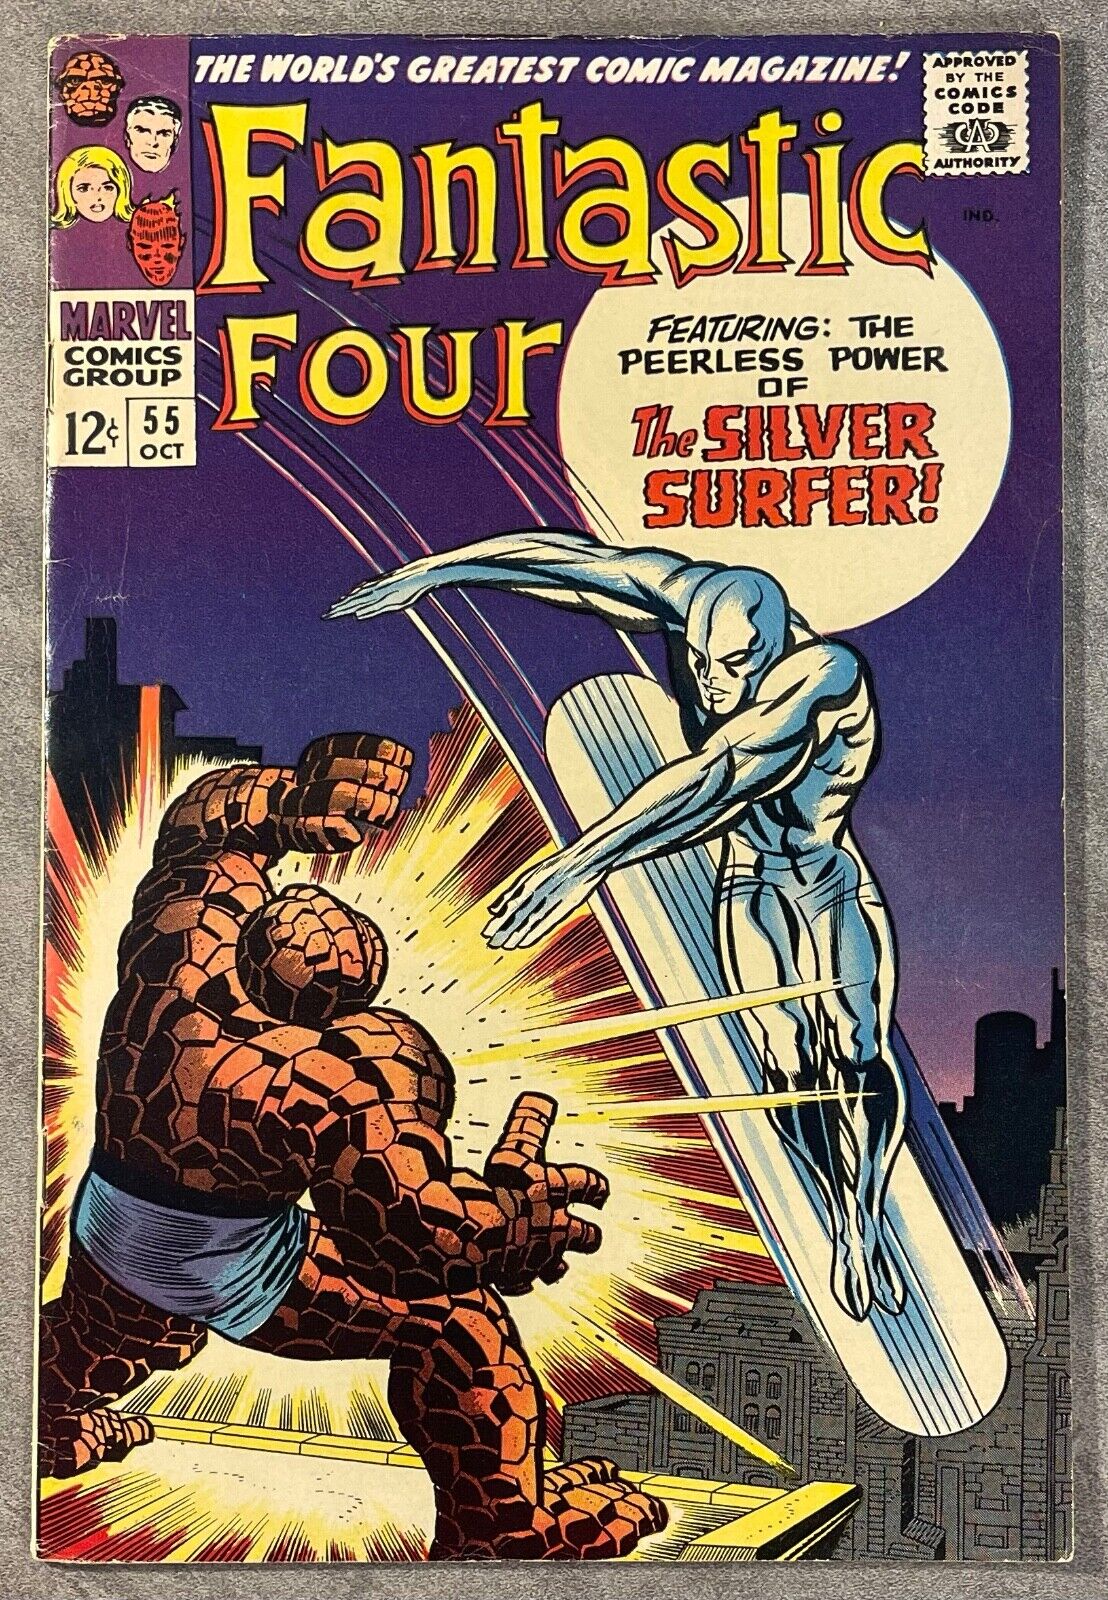 FANTASTIC FOUR #55 OCT 1966 *CLASSIC SILVER SURFER COVER* VERY NICE BOOK FINE+